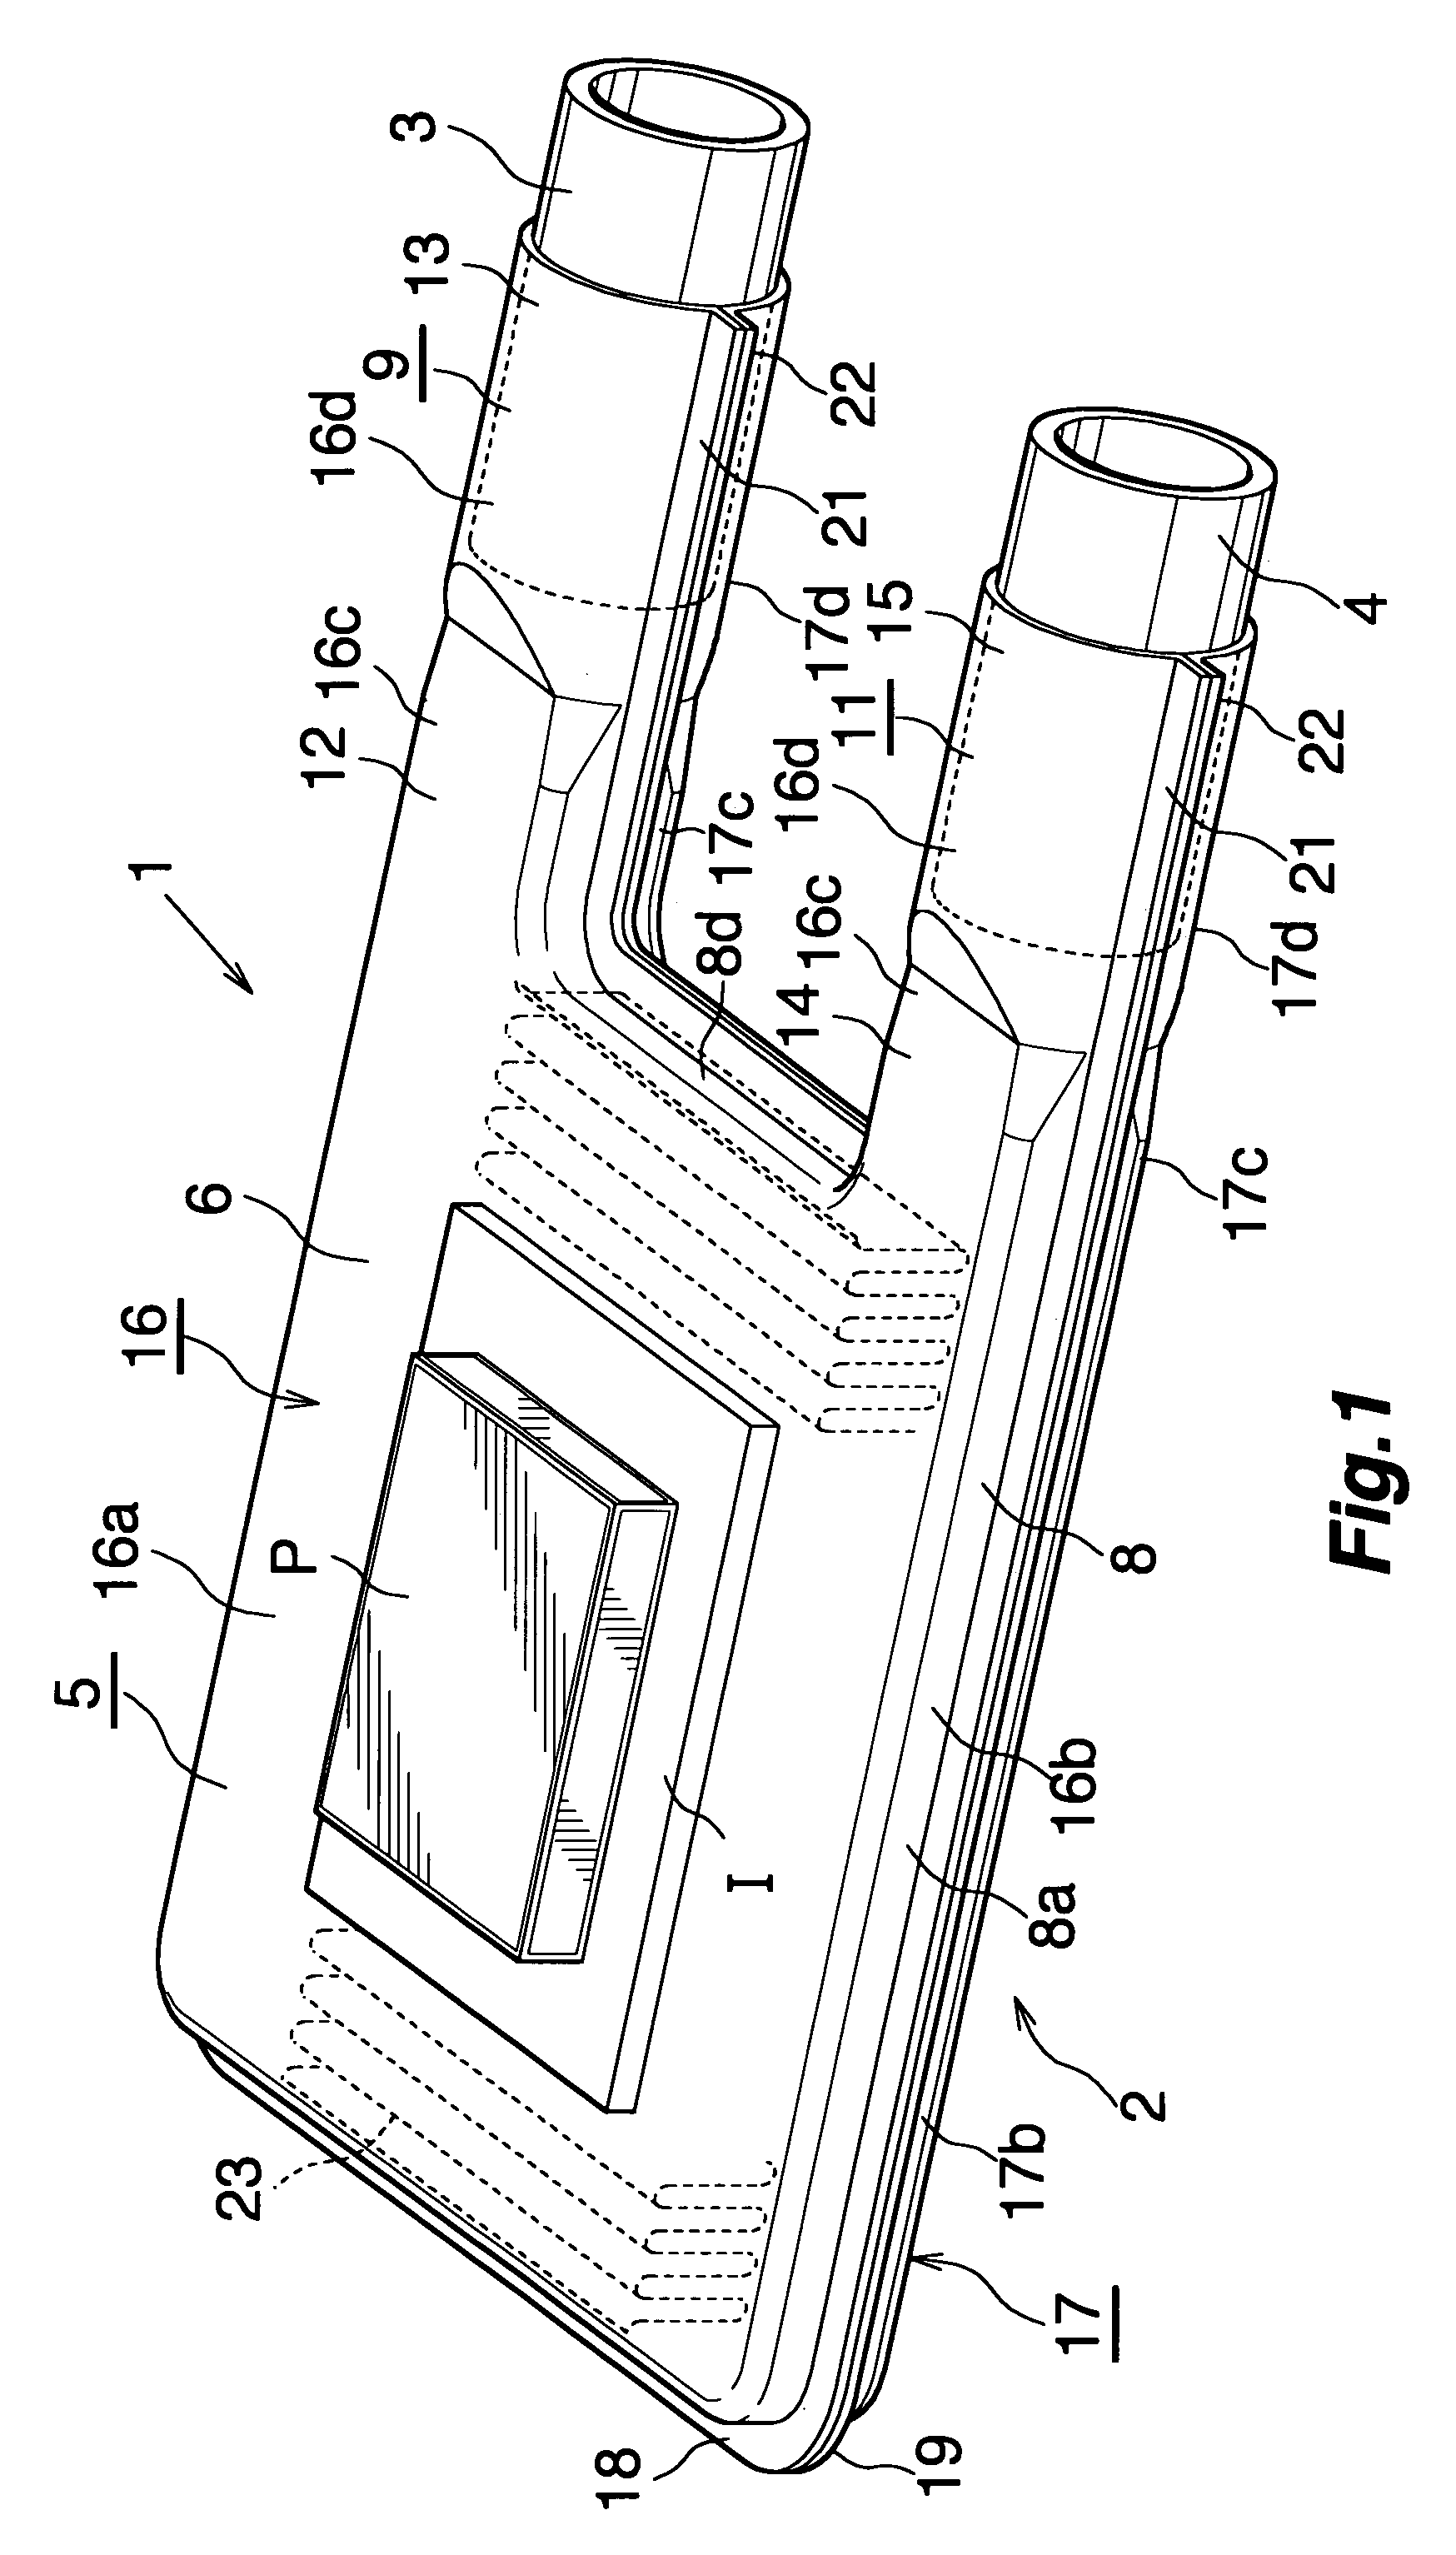 Method of manufacturing a pipe coupling component